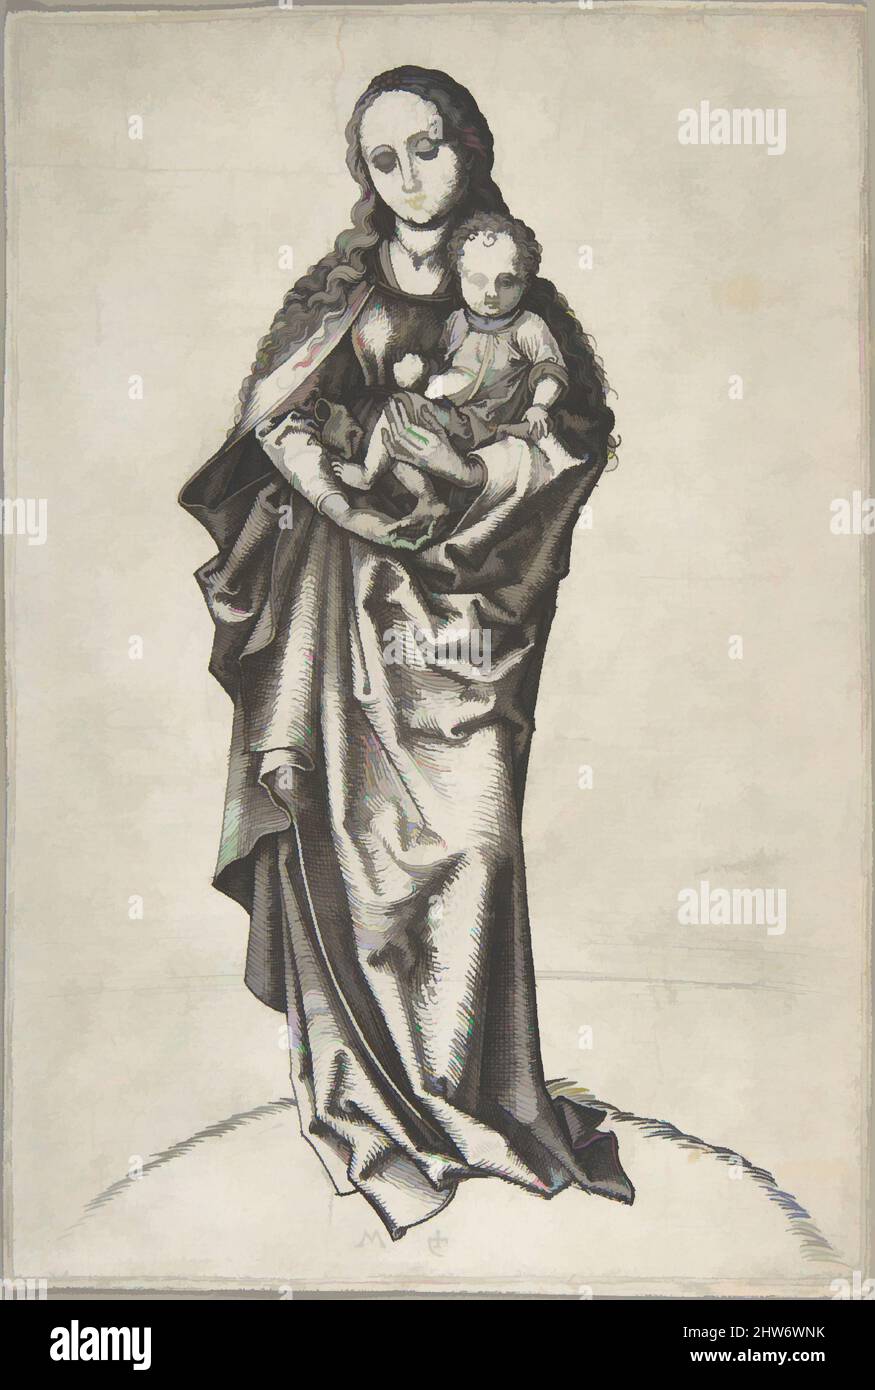 Art inspired by Virgin and Child with an Apple, ca. 1475, Engraving, Sheet: 6 13/16 x 4 5/8 in. (17.3 x 11.7 cm), Prints, Martin Schongauer (German, Colmar ca. 1435/50–1491 Breisach, Classic works modernized by Artotop with a splash of modernity. Shapes, color and value, eye-catching visual impact on art. Emotions through freedom of artworks in a contemporary way. A timeless message pursuing a wildly creative new direction. Artists turning to the digital medium and creating the Artotop NFT Stock Photo